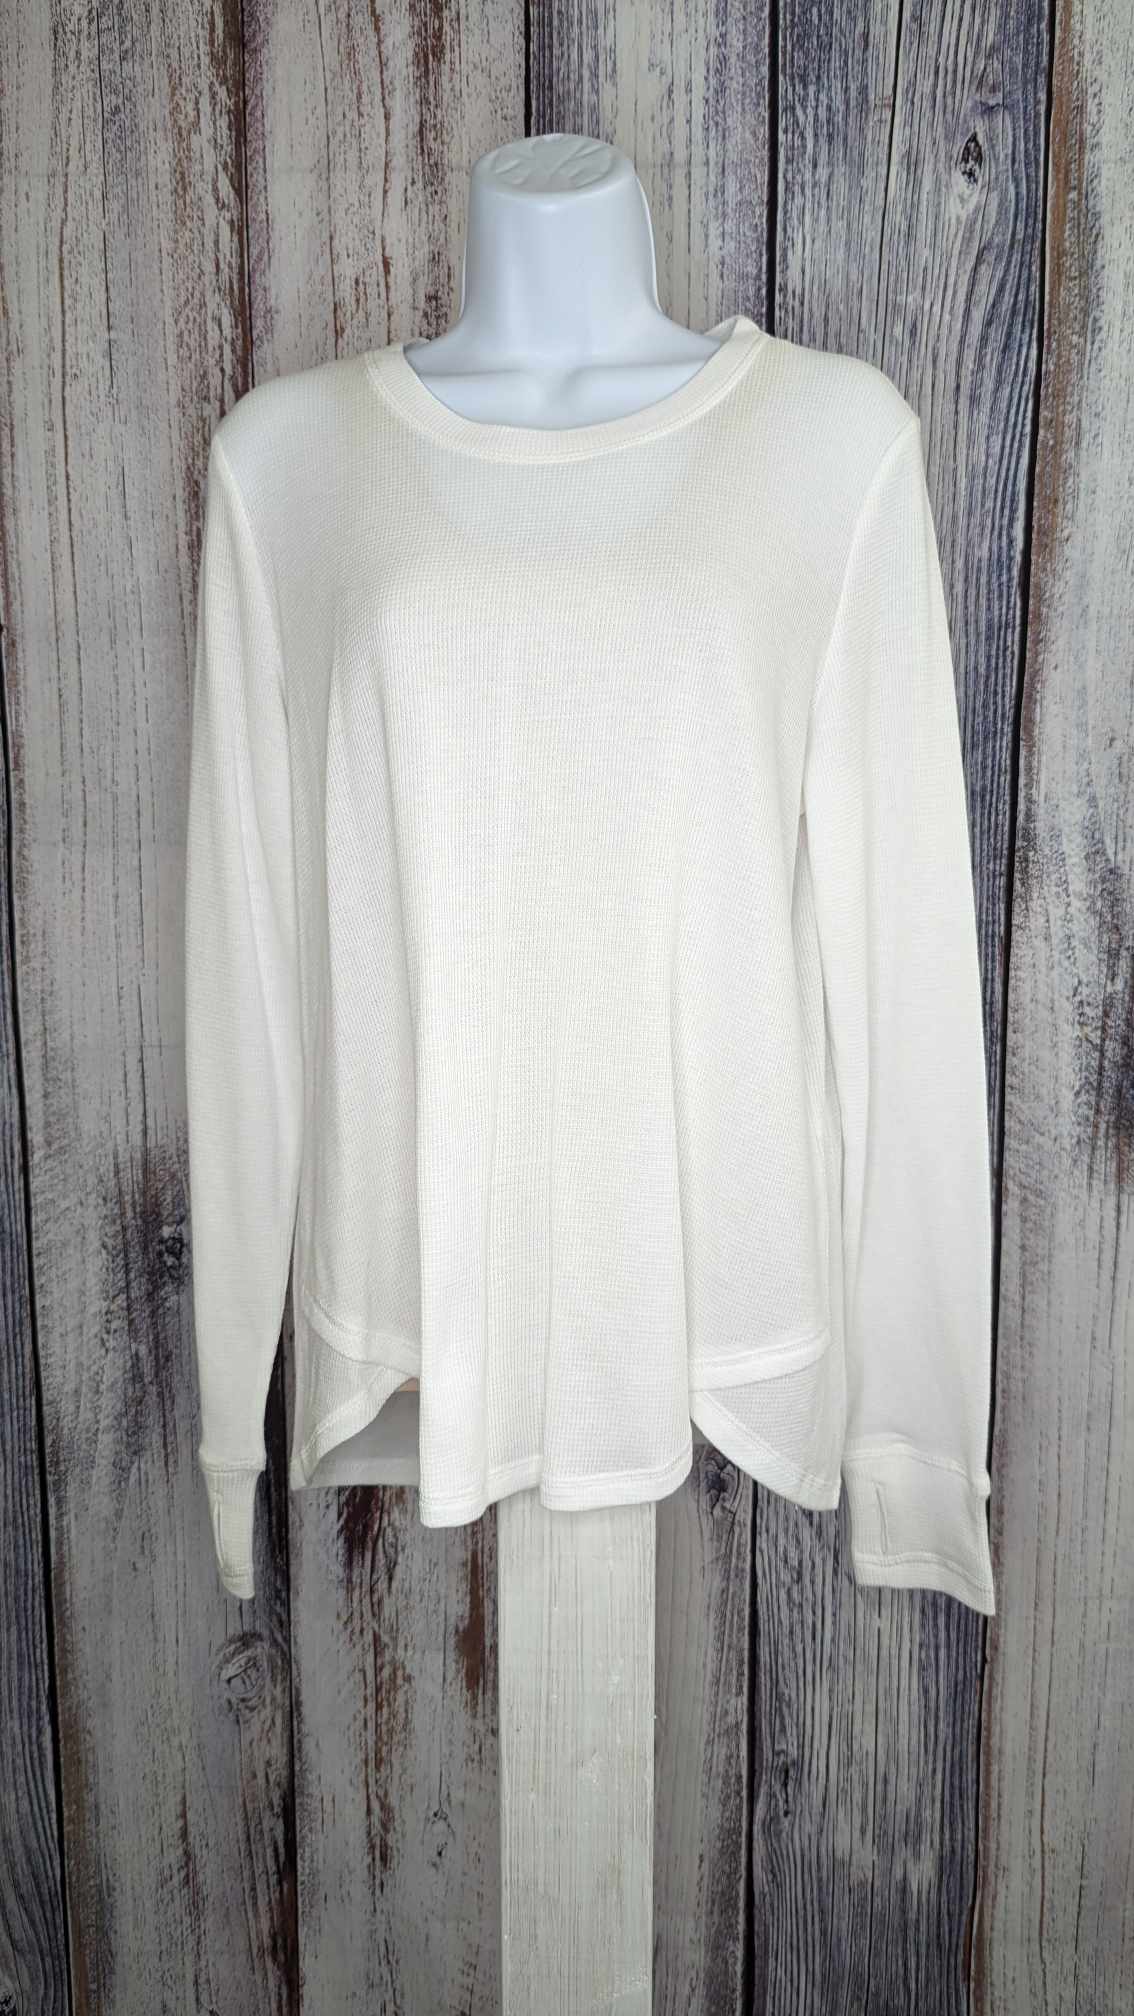 LARGE PEARL A463117 Susan Graver SG Sport Thermal Knit Top with Thumbhole Detail